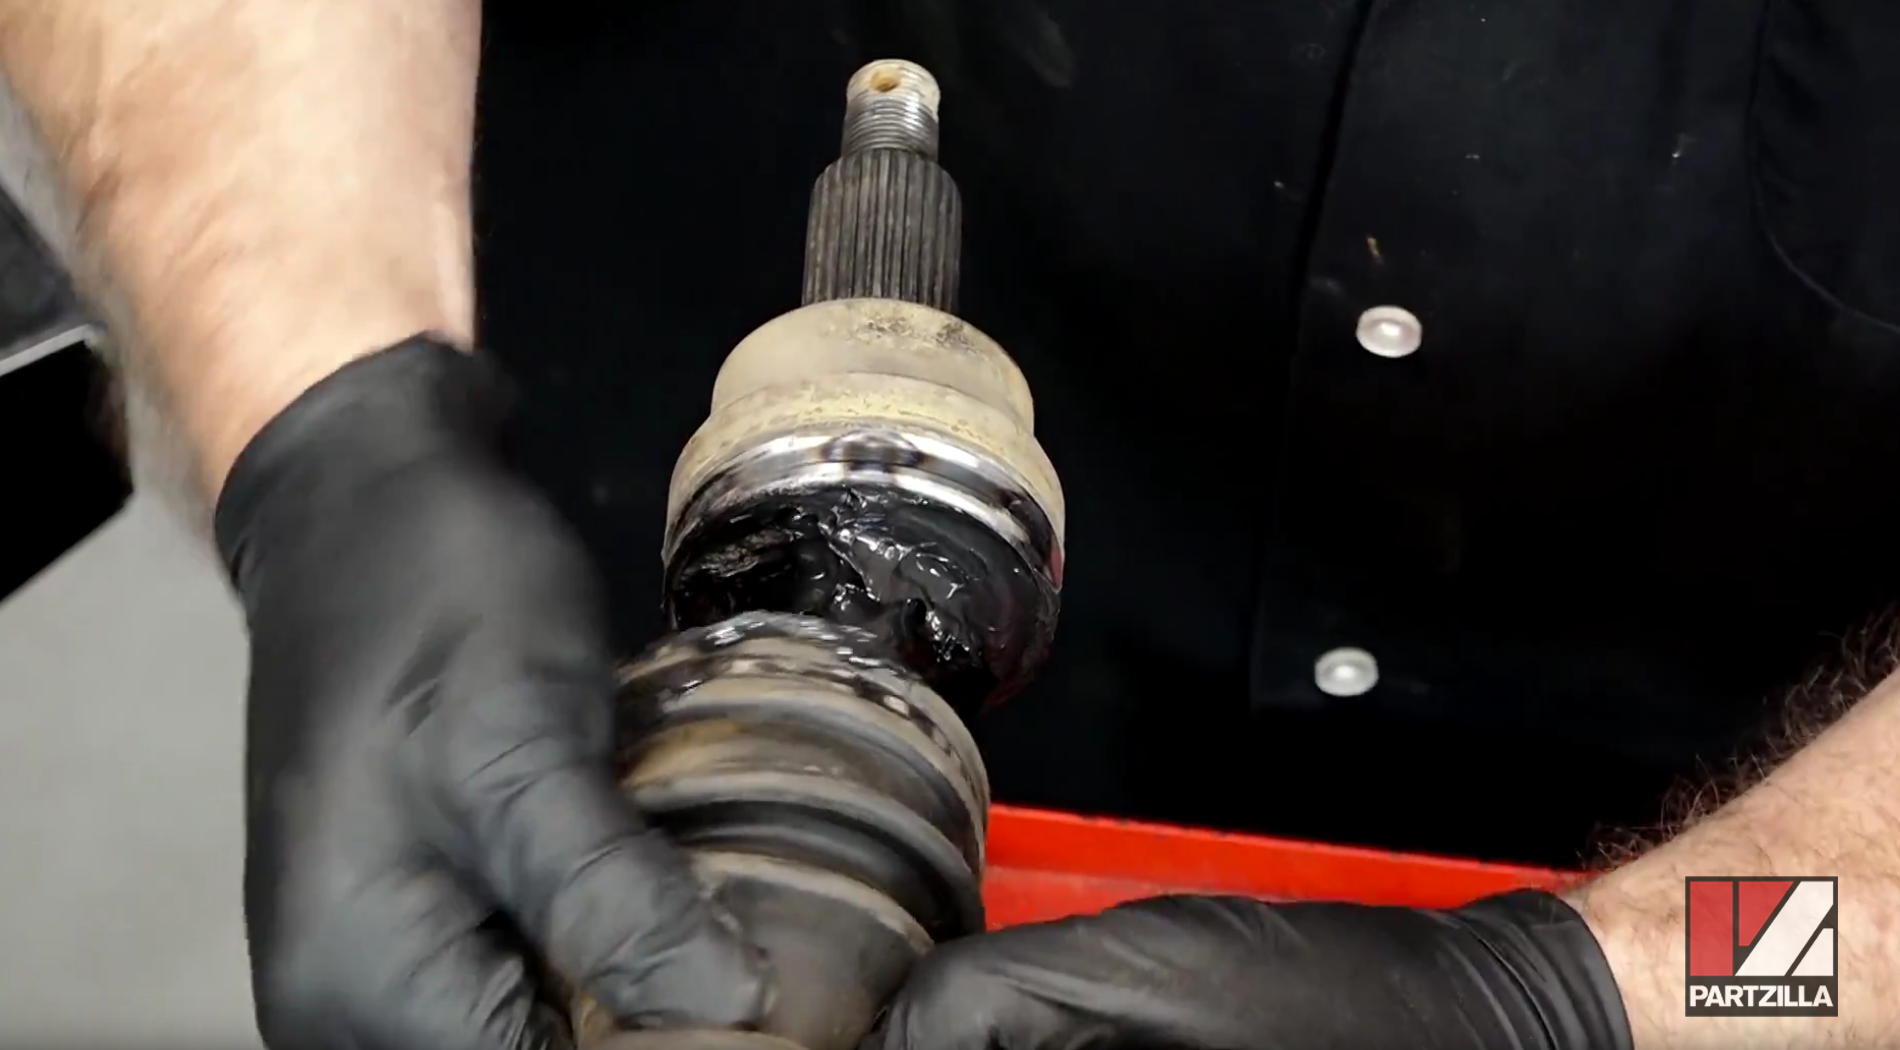 Polaris RZR CV joint boot removal